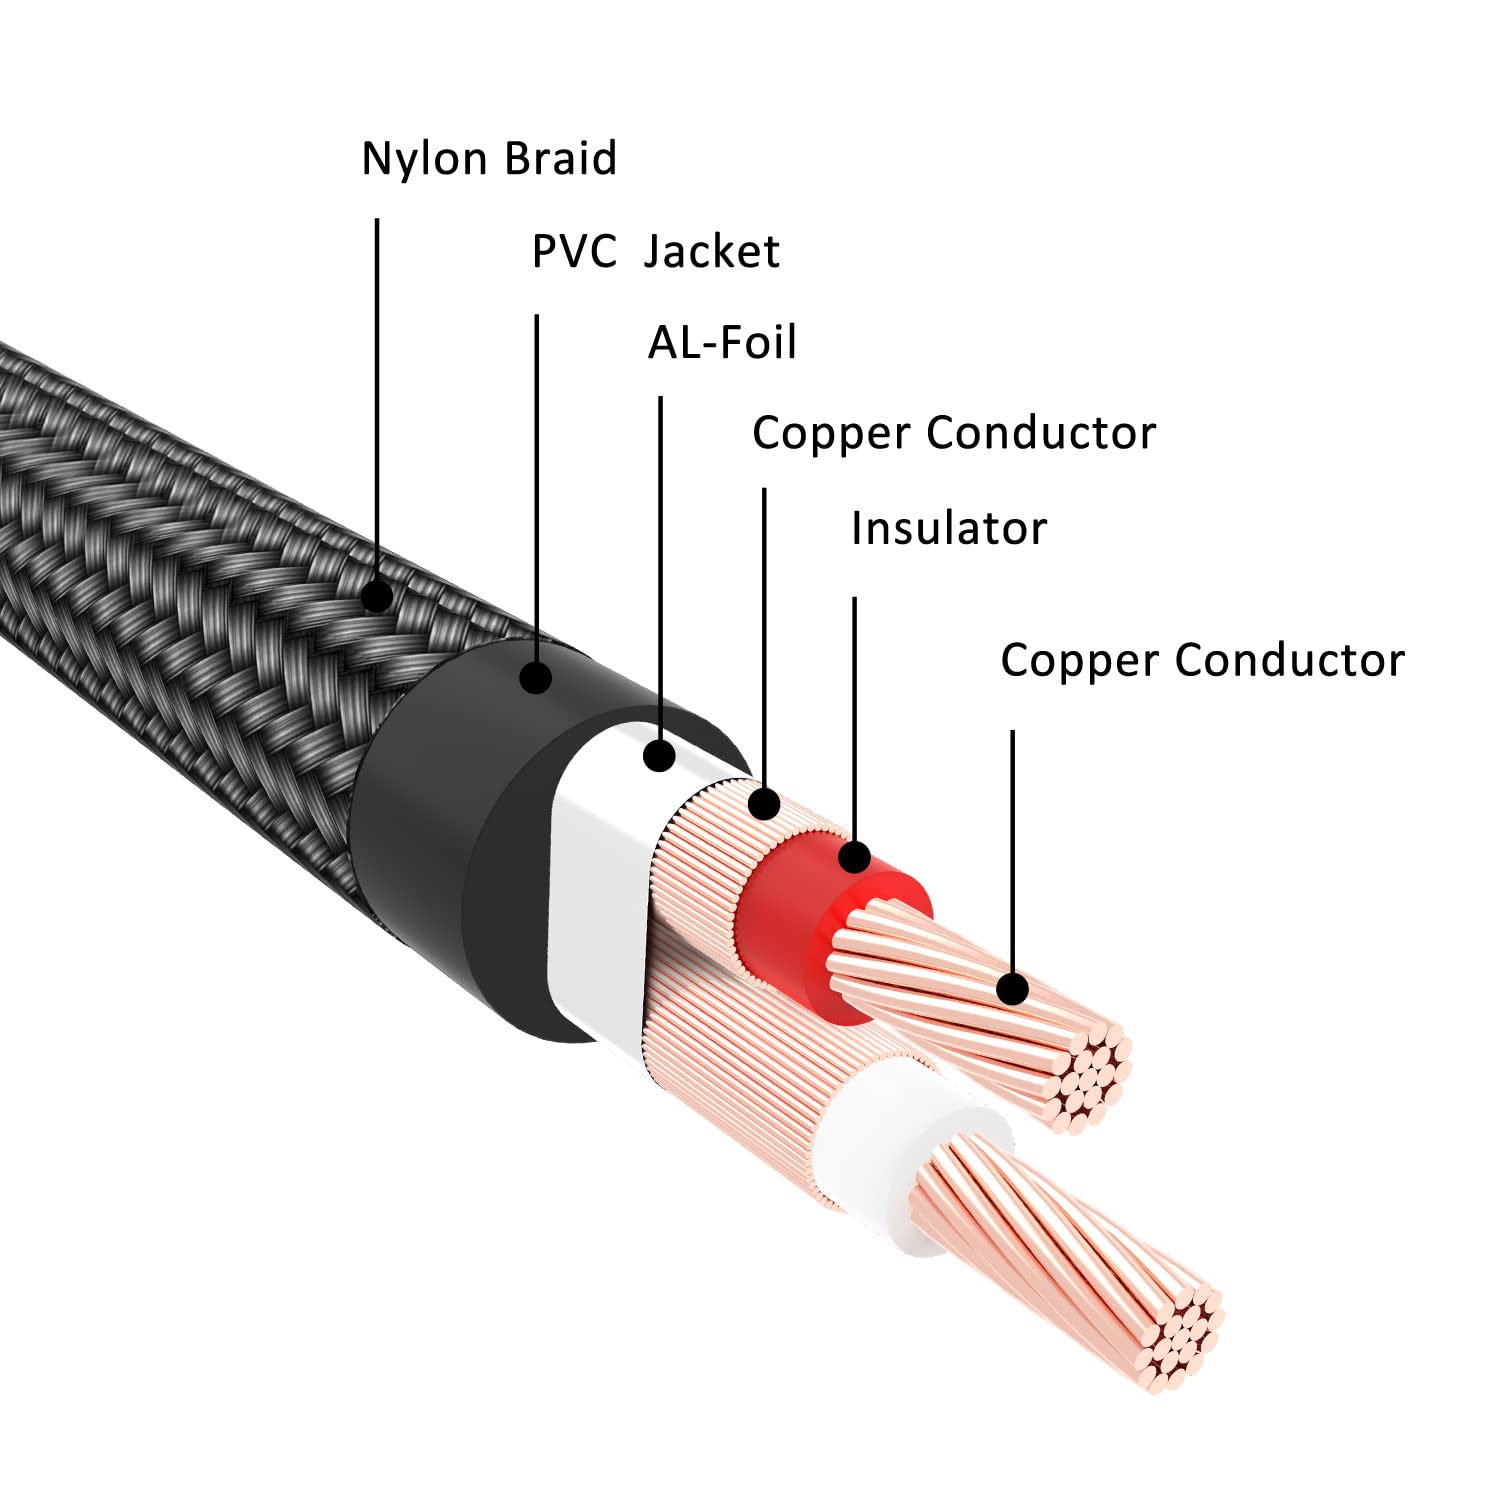 J&D 2 RCA Male to 2 RCA Female Stereo Audio Extension Cable, PVC Shelled and Nylon Braid, 6ft - image 3 of 5